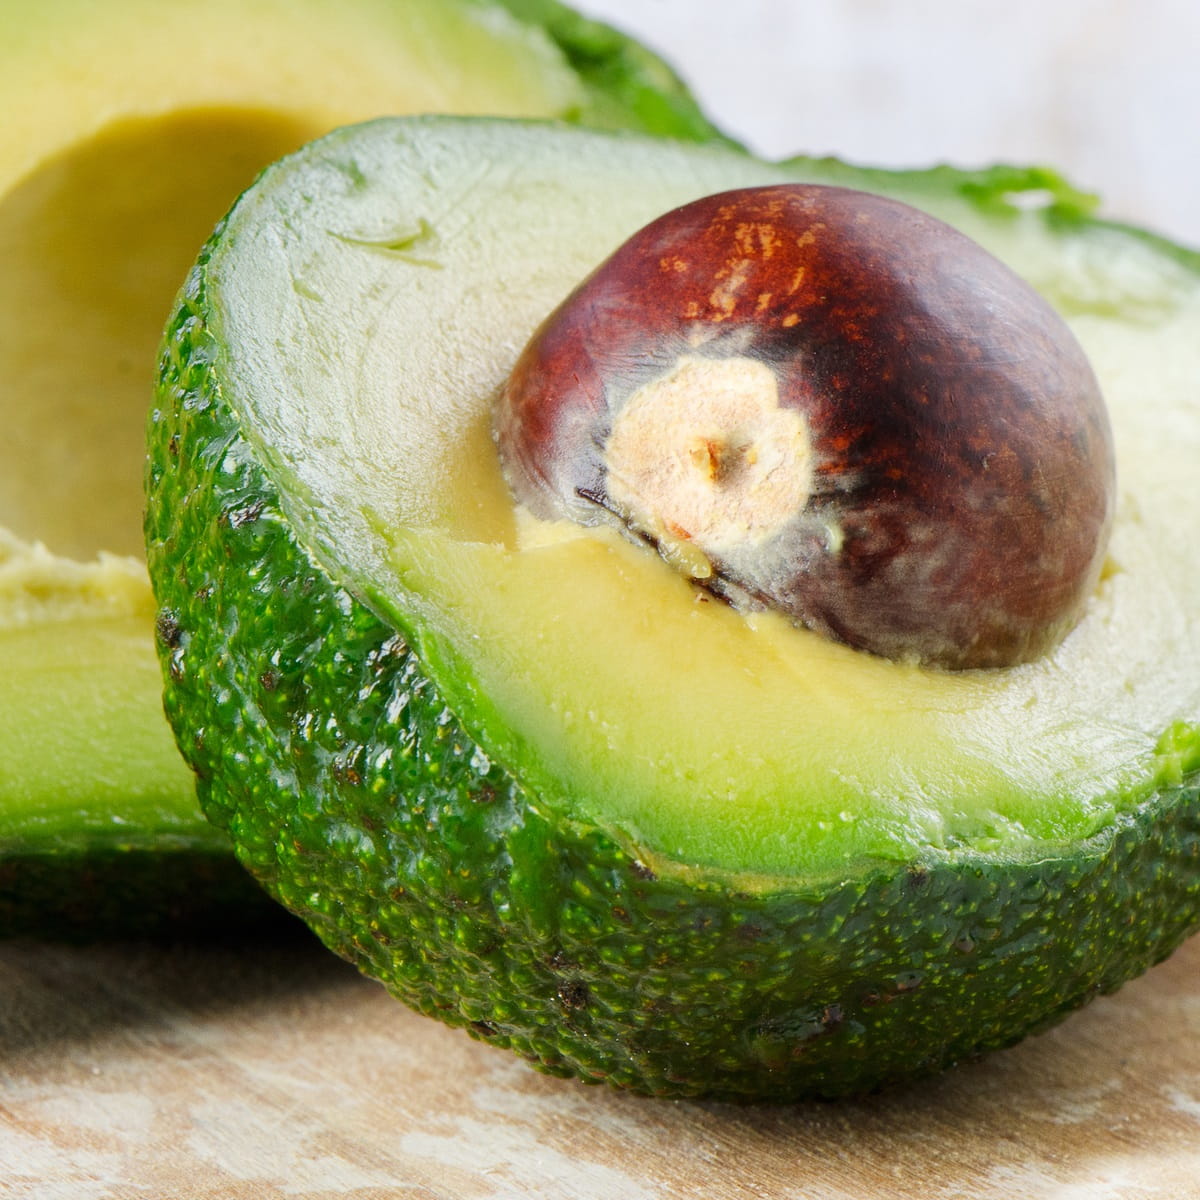 Avocado sliced in half with seed